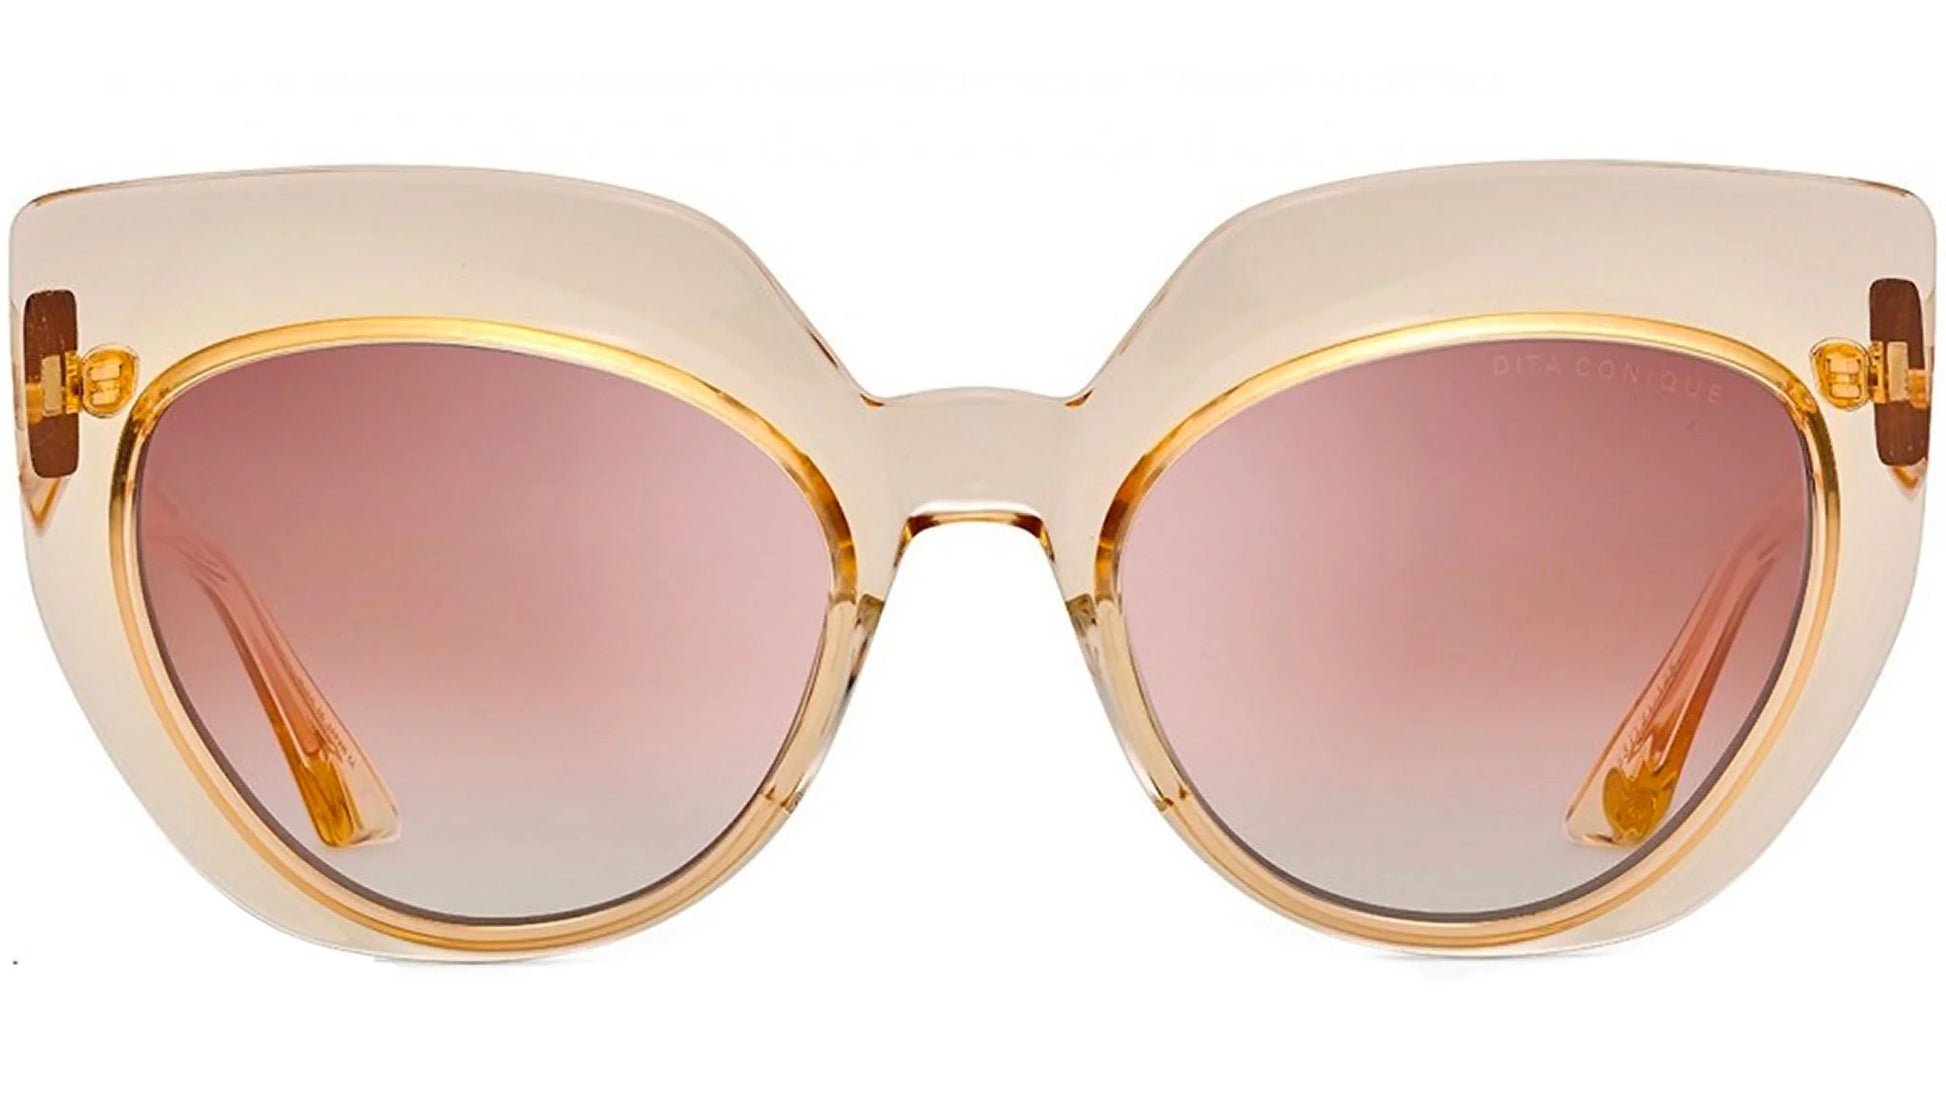 Buy DITA  Conique DTS514, a  Rose; Plastic Sunglasses Frame with a Cat Eye shape. Adair Eyewear - 40+ Years History